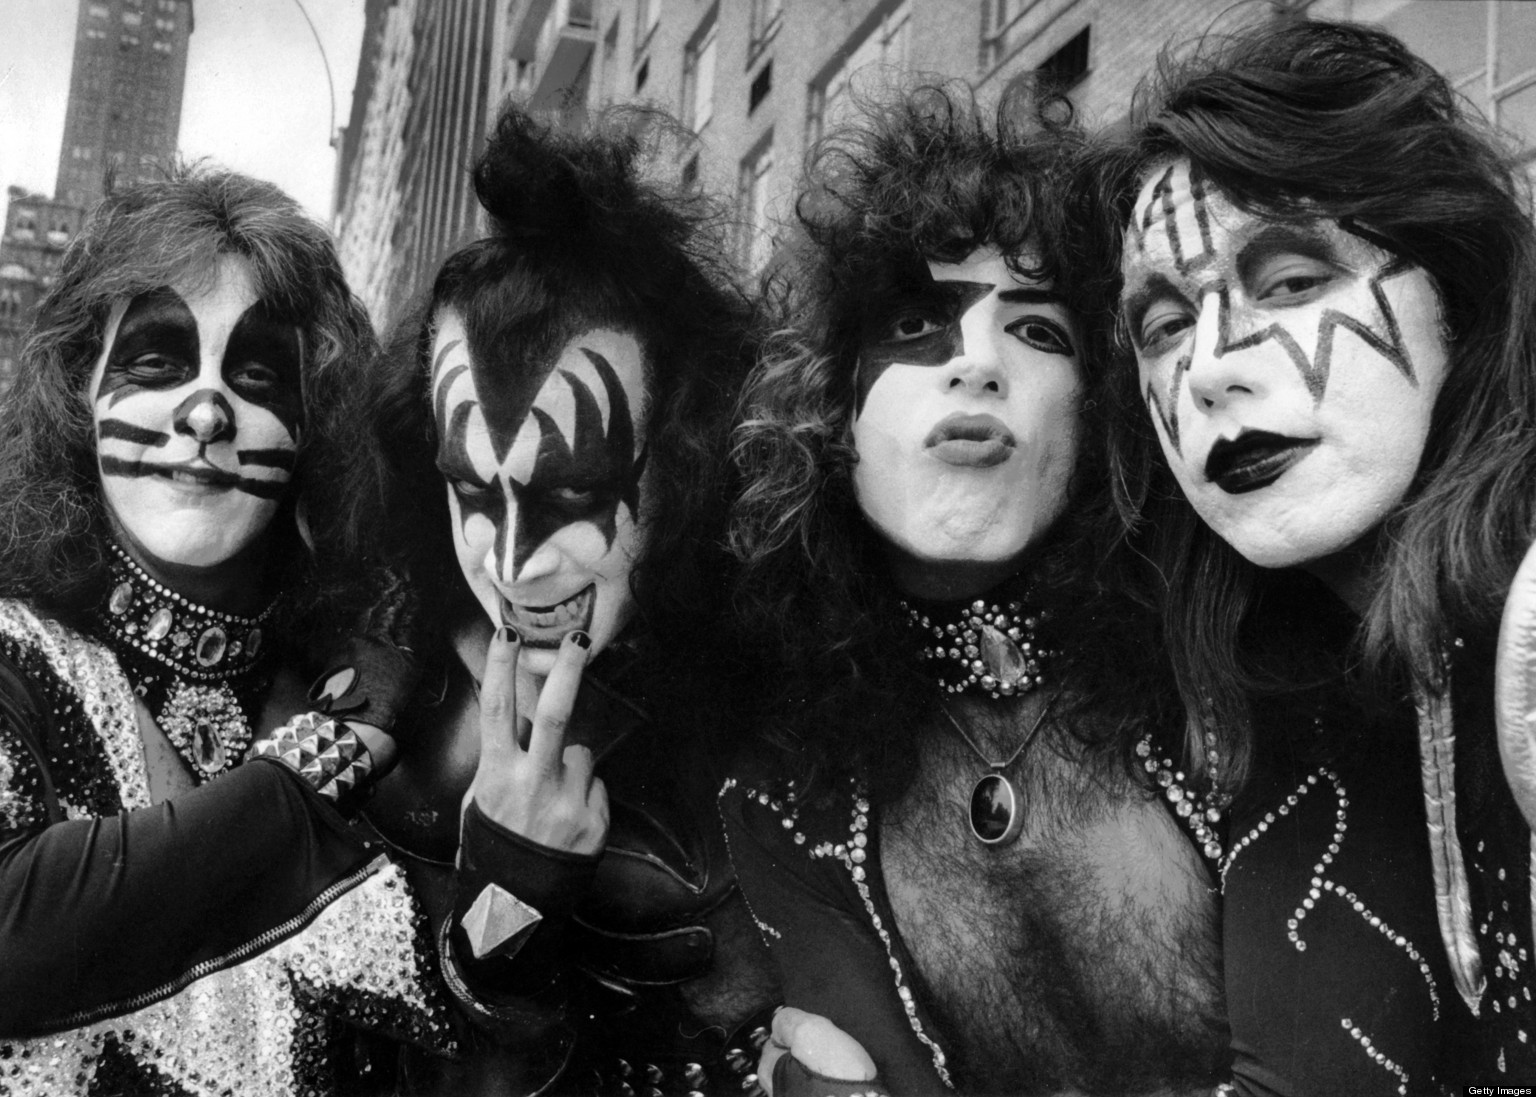 Gene Simmons Speaks About The Chances Of A Reunion Of The Original Kiss Lineup Loaded Radio